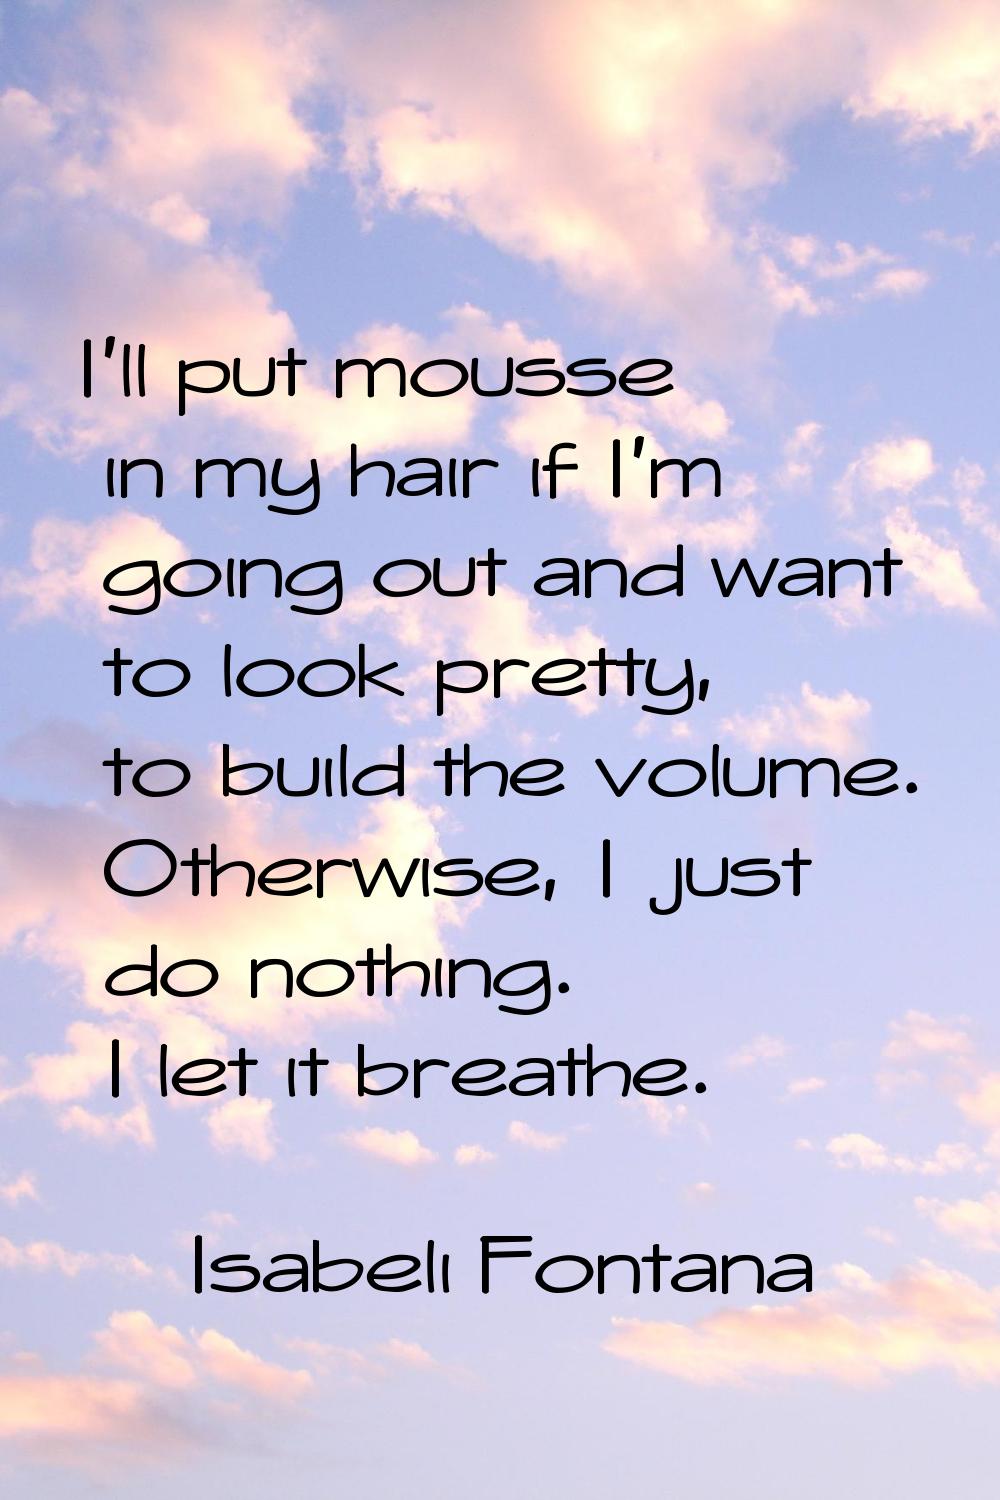 I'll put mousse in my hair if I'm going out and want to look pretty, to build the volume. Otherwise